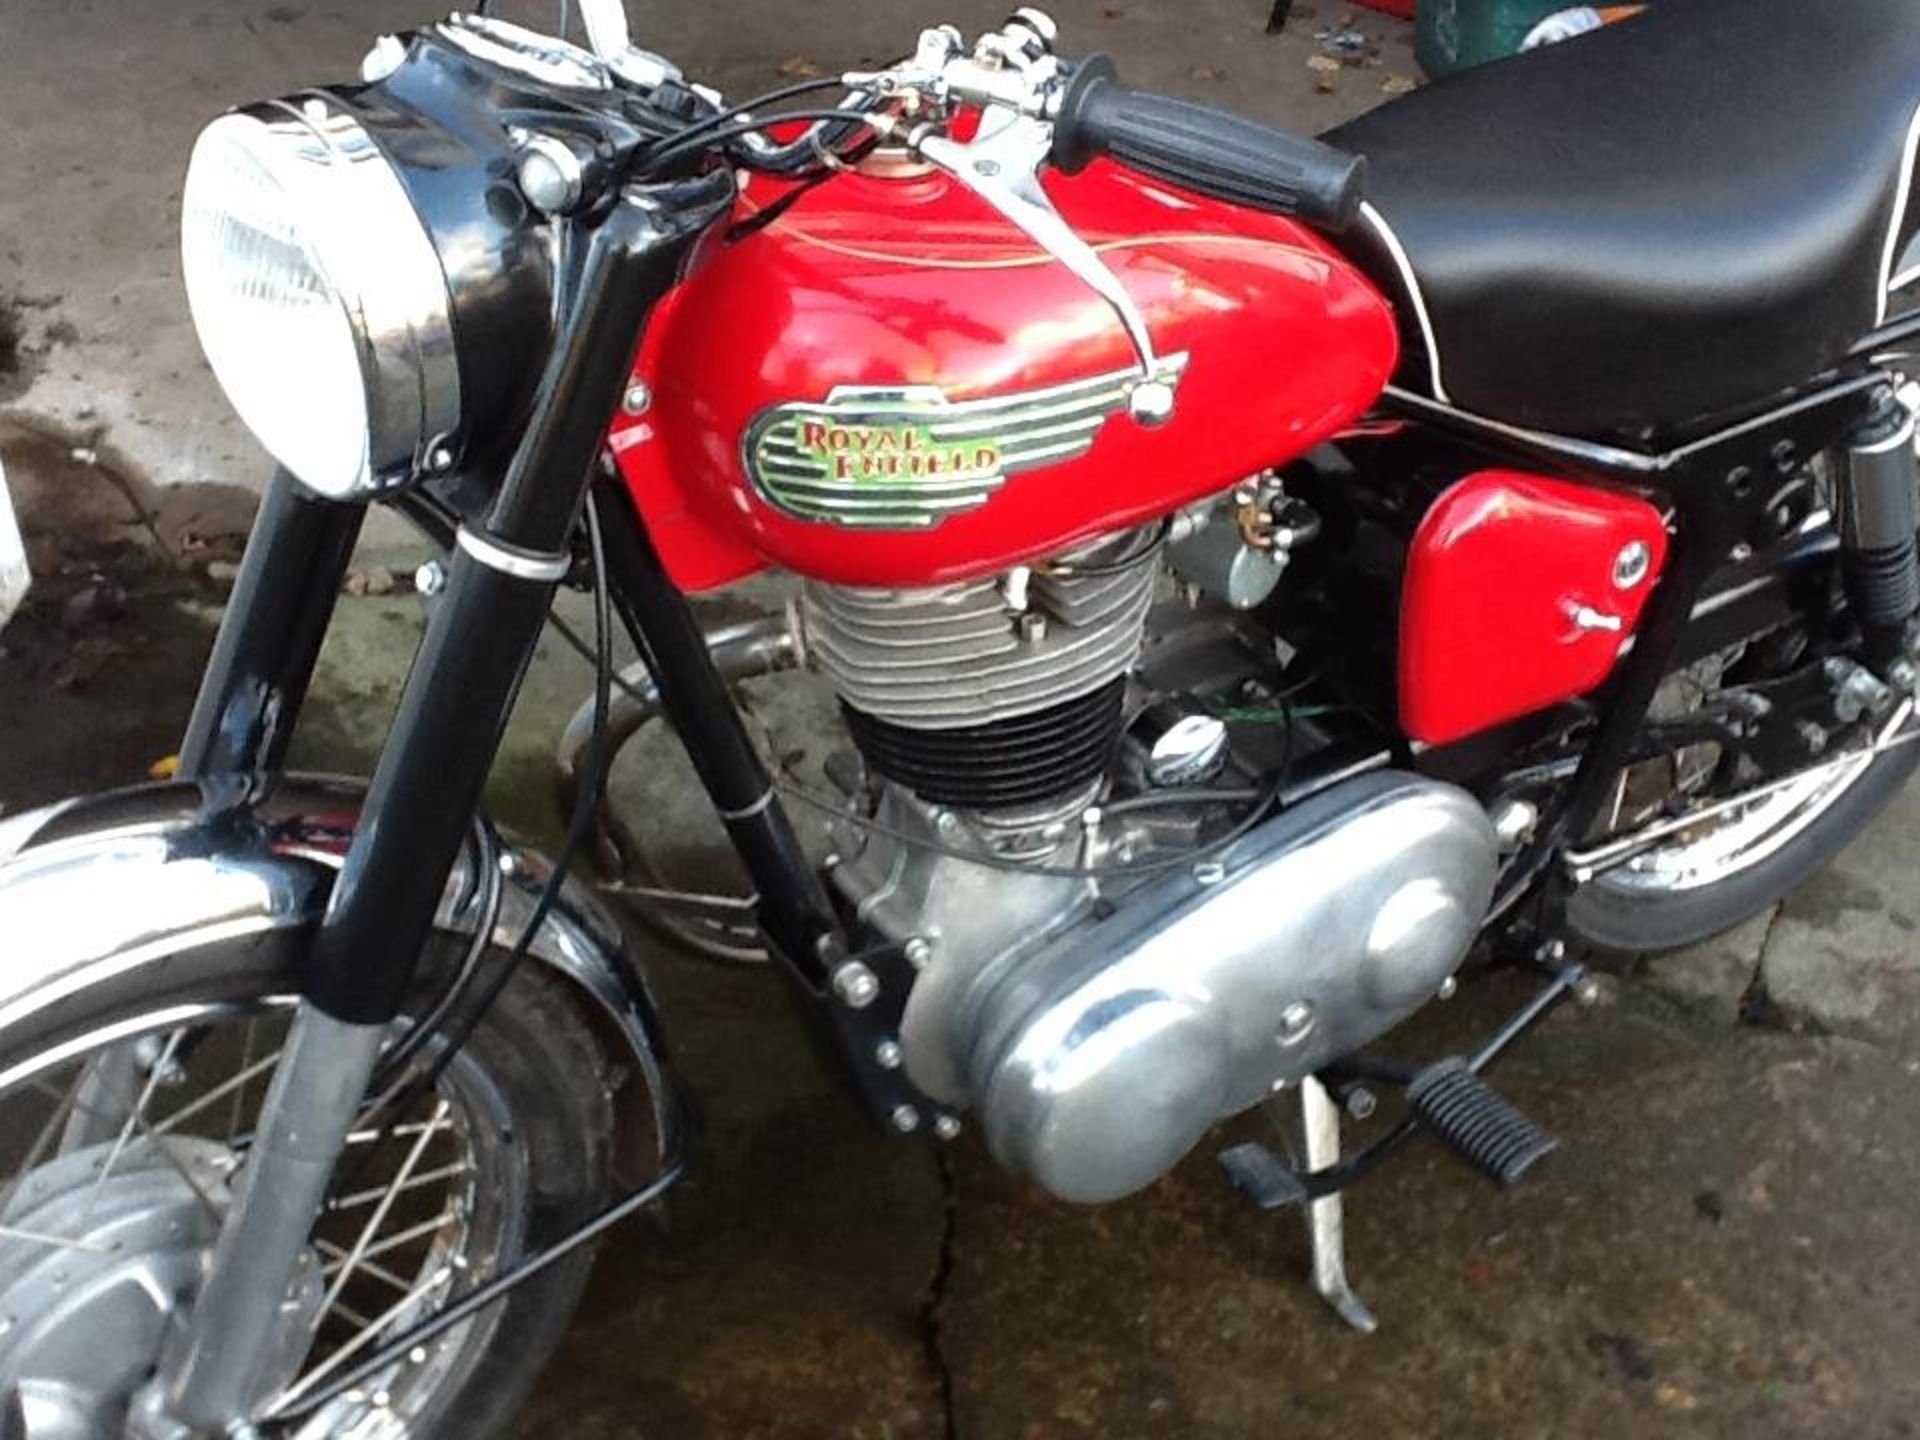 A 1959 ROYAL ENFIELD 350 CLIPPER MOTORCYCLE. THIS MACHINE LEFT THE FACTORY IN REDDITCH ON 6TH - Image 8 of 11